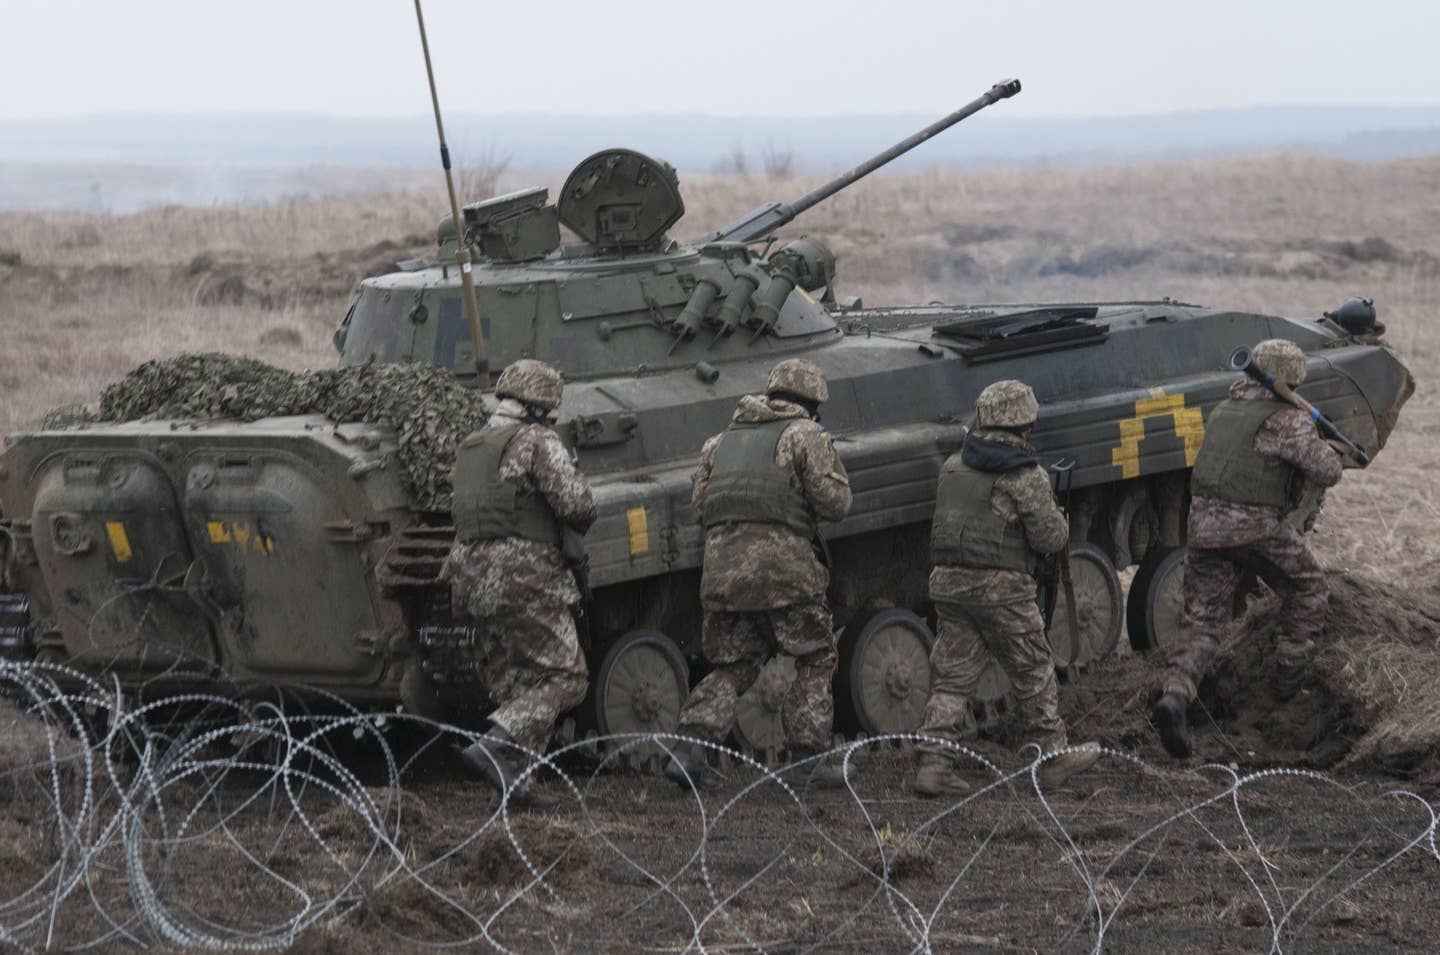 Ukrainian soldiers rush through a wire obstacle while taking cover behind their BMP-2 armored vehicle during a live-fire training exercise in 2017.<em> U.S. Army</em><a href="https://api.army.mil/e2/c/images/2017/03/18/470333/original.jpg" target="_blank" rel="noreferrer noopener"></a>